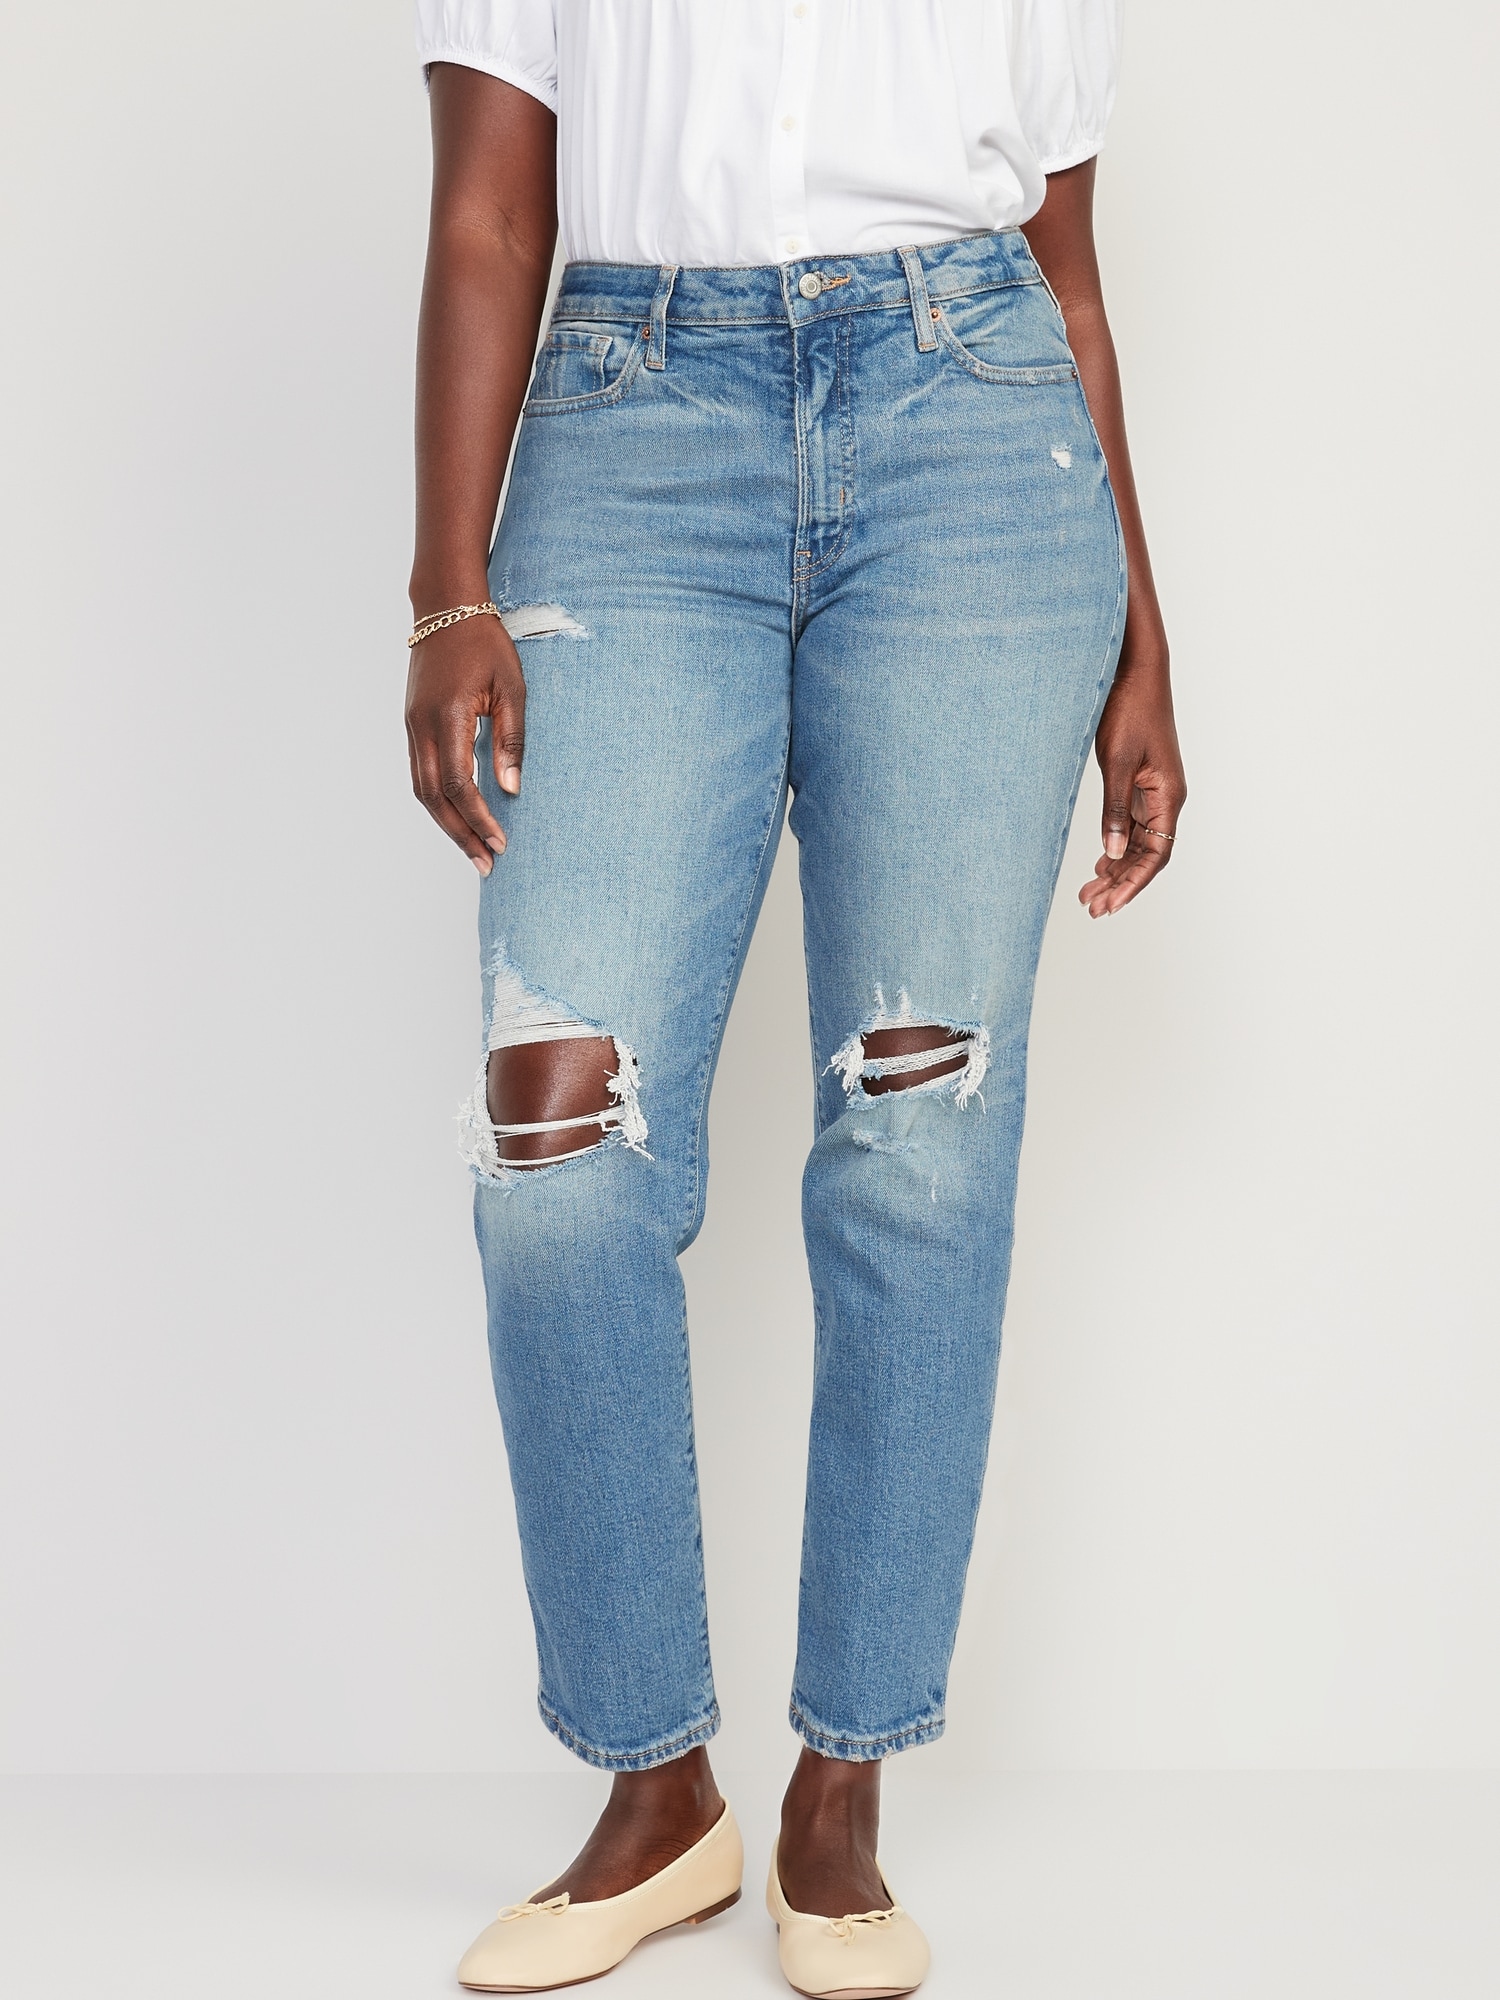 High-Waisted OG Straight Ripped Jeans for